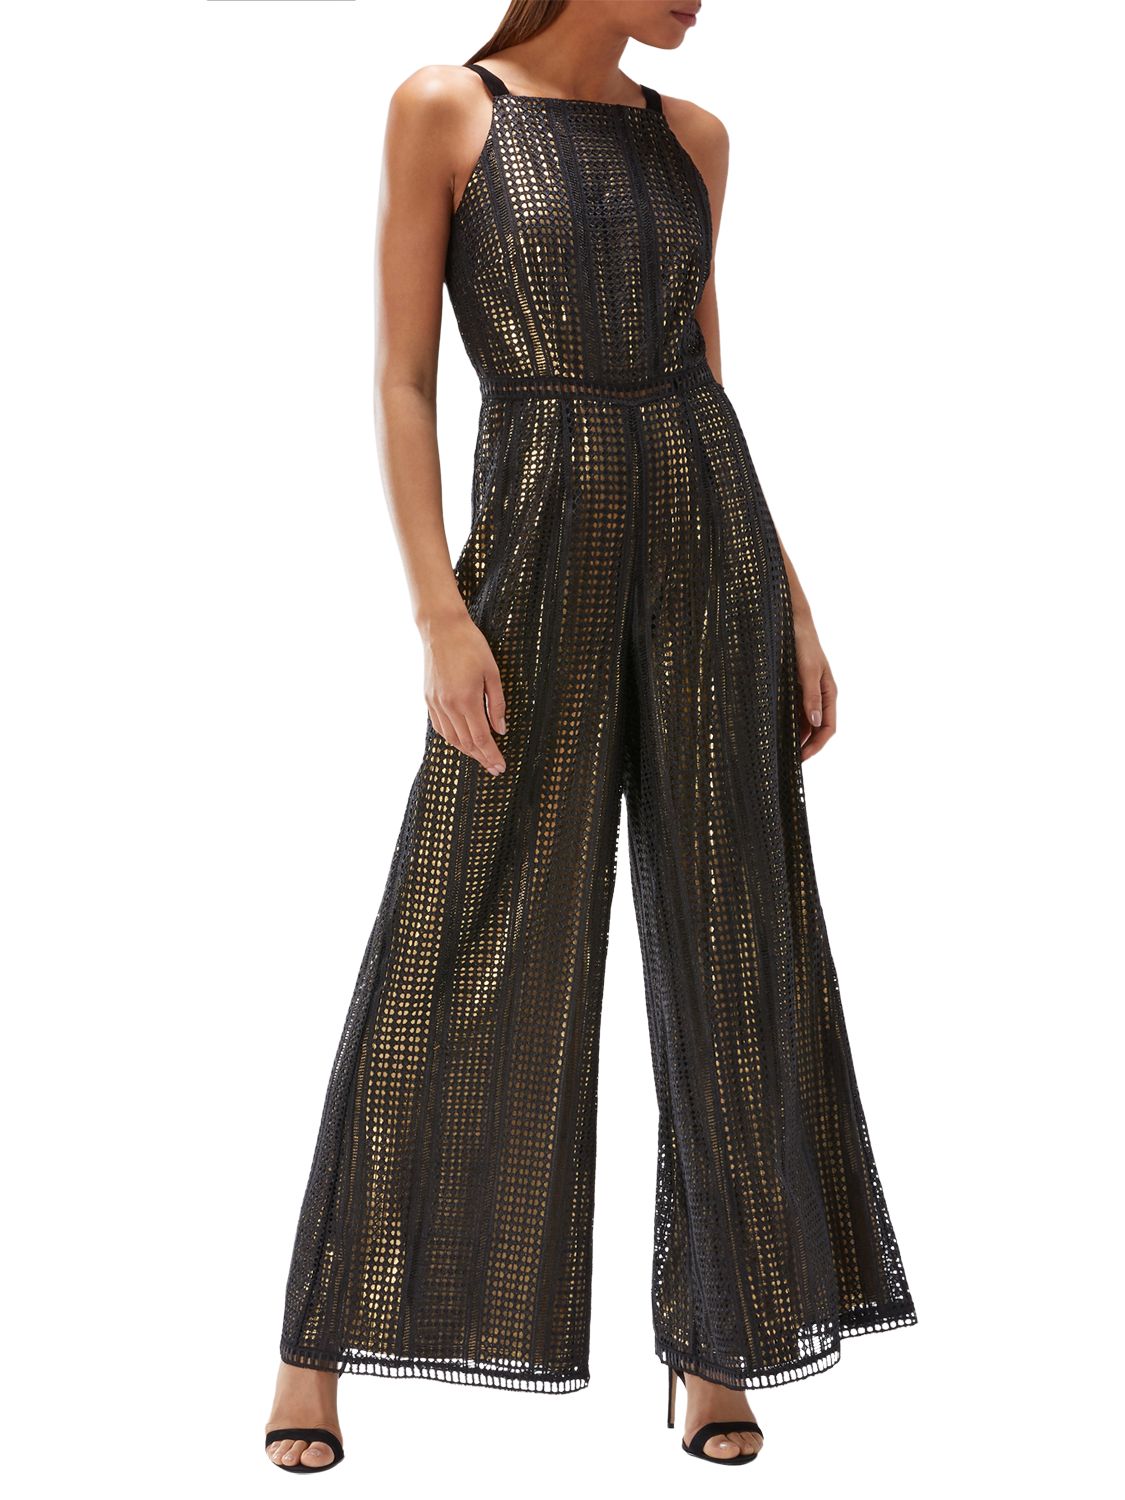 black and gold womens jumpsuit